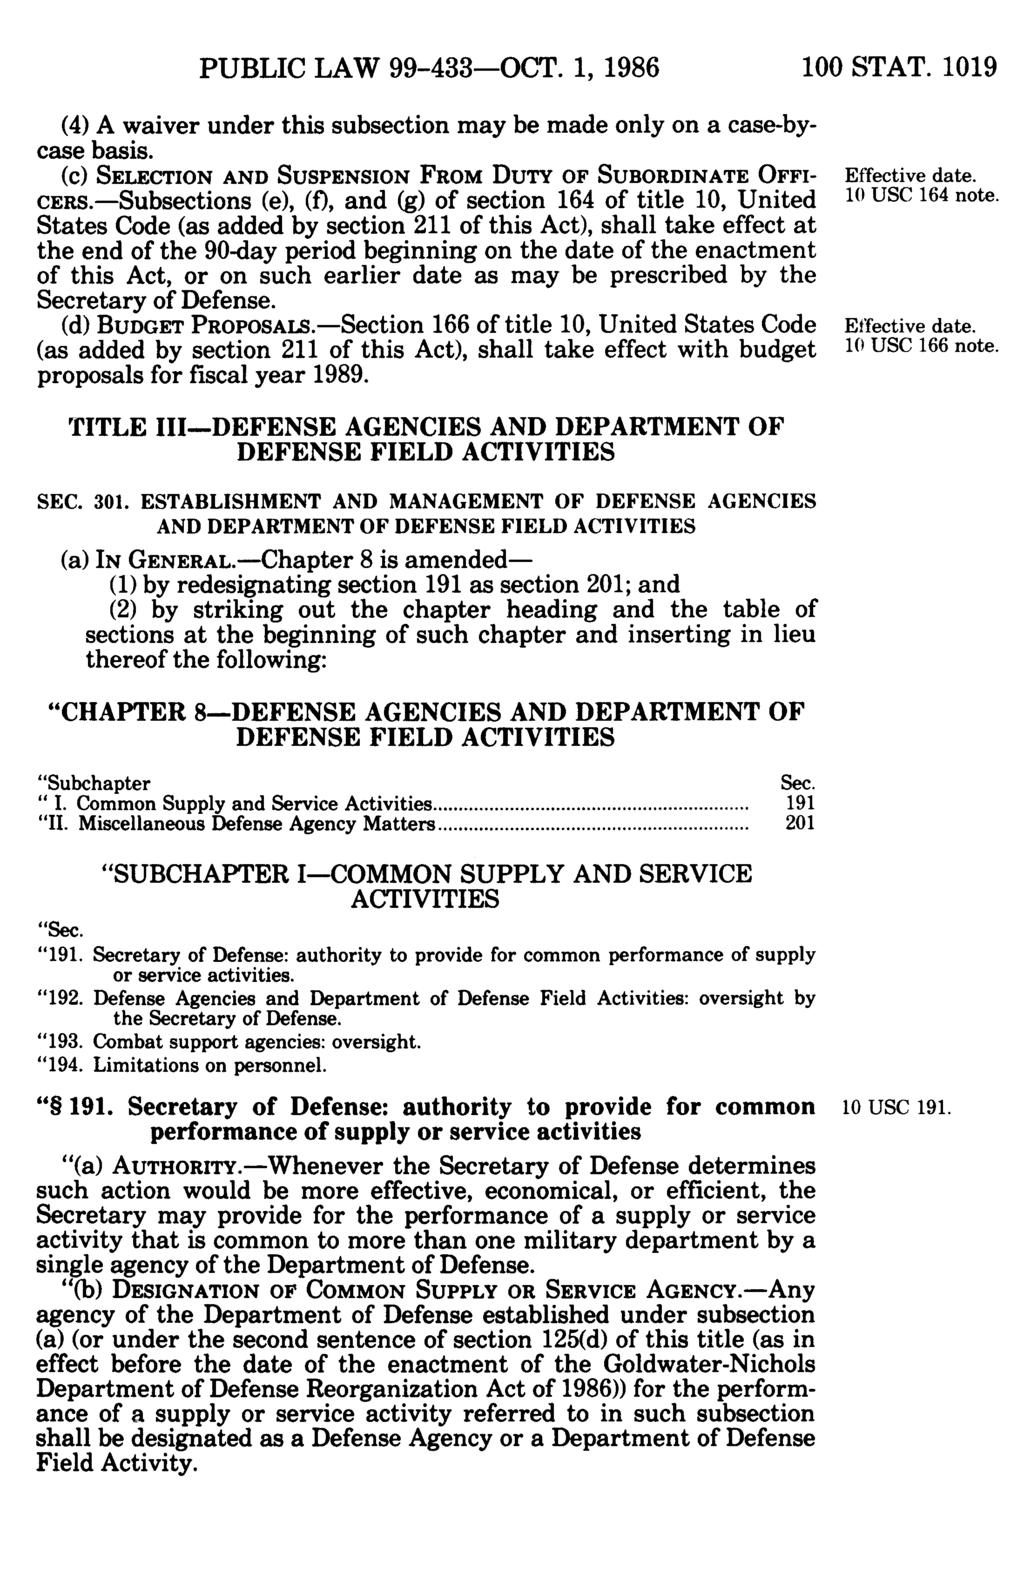 PUBLIC LAW 99-433-OCT. 1, 1986 100 STAT. 1019 (4) A waiver under this subsection may be made only on a case-bycase basis. (c) SELECTION AND SUSPENSION FROM DUTY OF SUBORDINATE OFFI- Effective date.